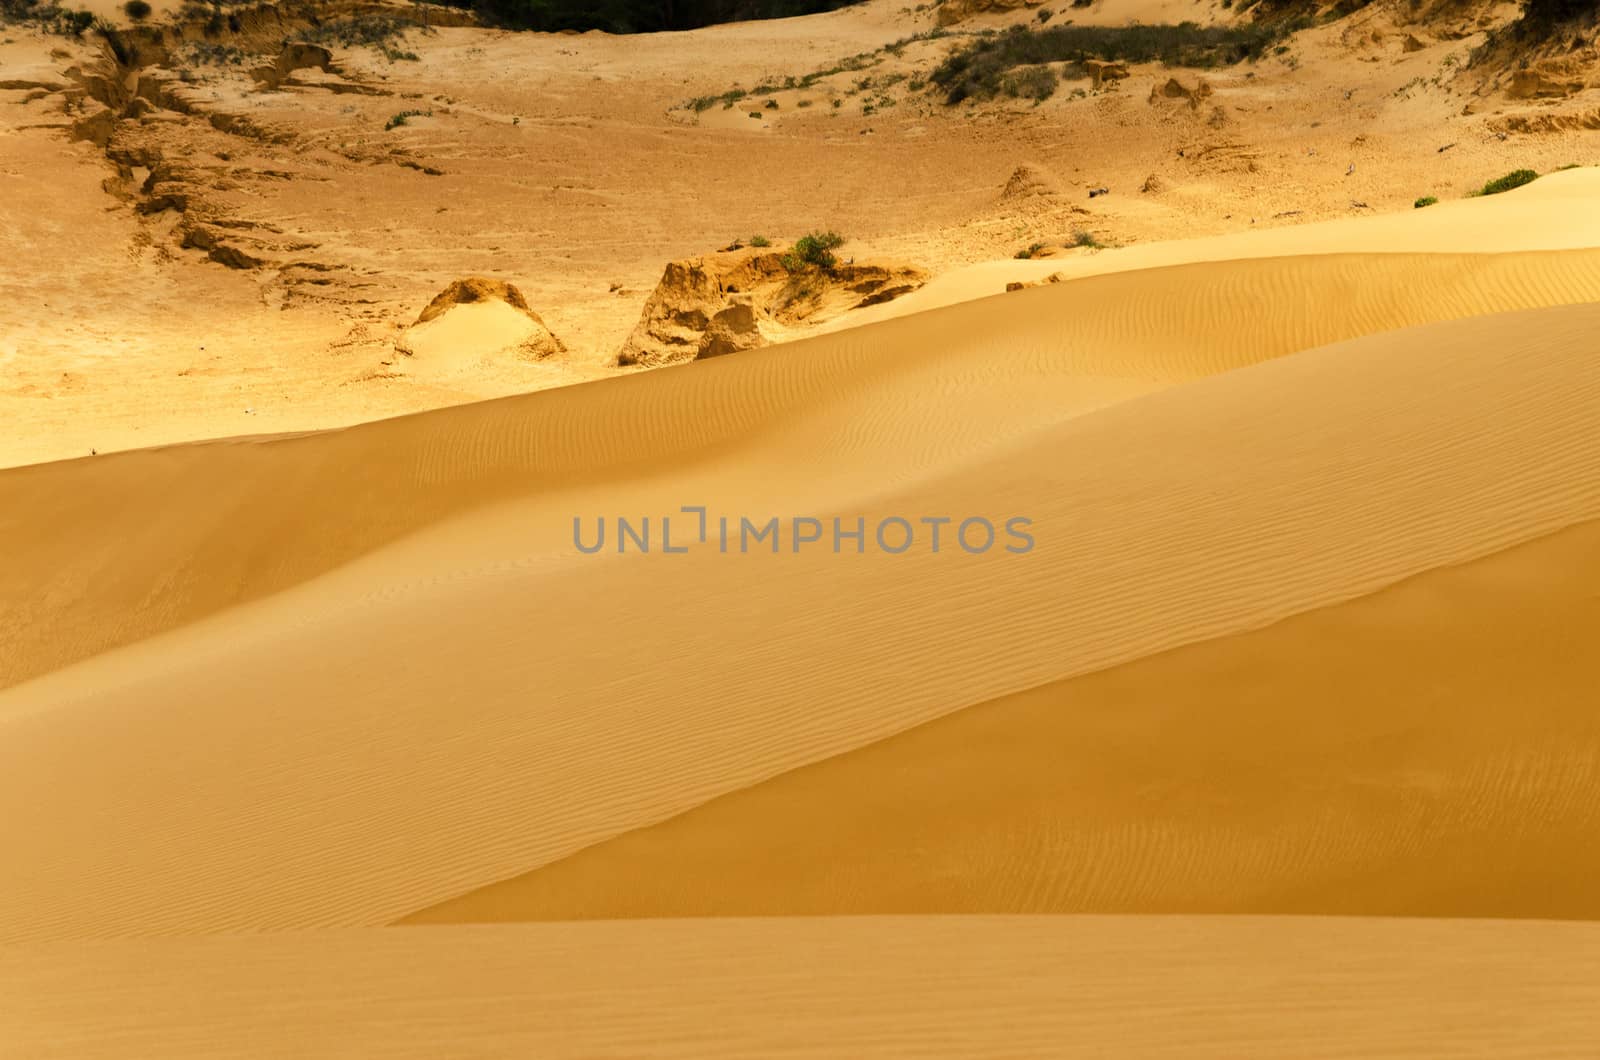 Sand Dune View by jkraft5